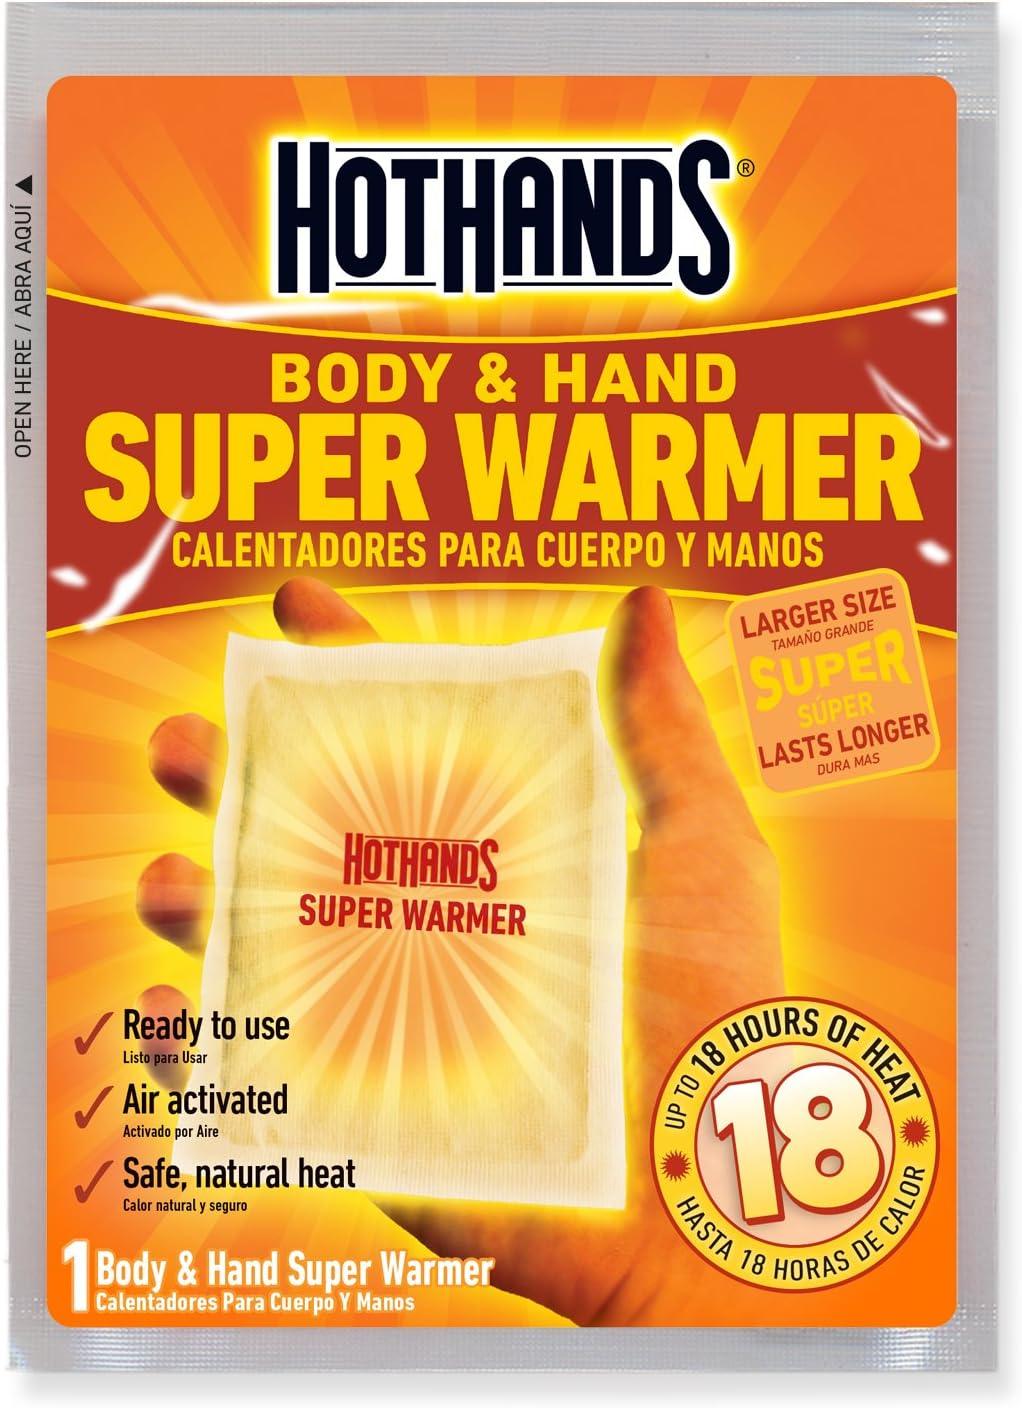 HotHands Toe, Hand, & Body Warmer Variety Pack - Long Lasting Safe Natural Odorless Air Activated Warmers - TRAPSKI, LLC